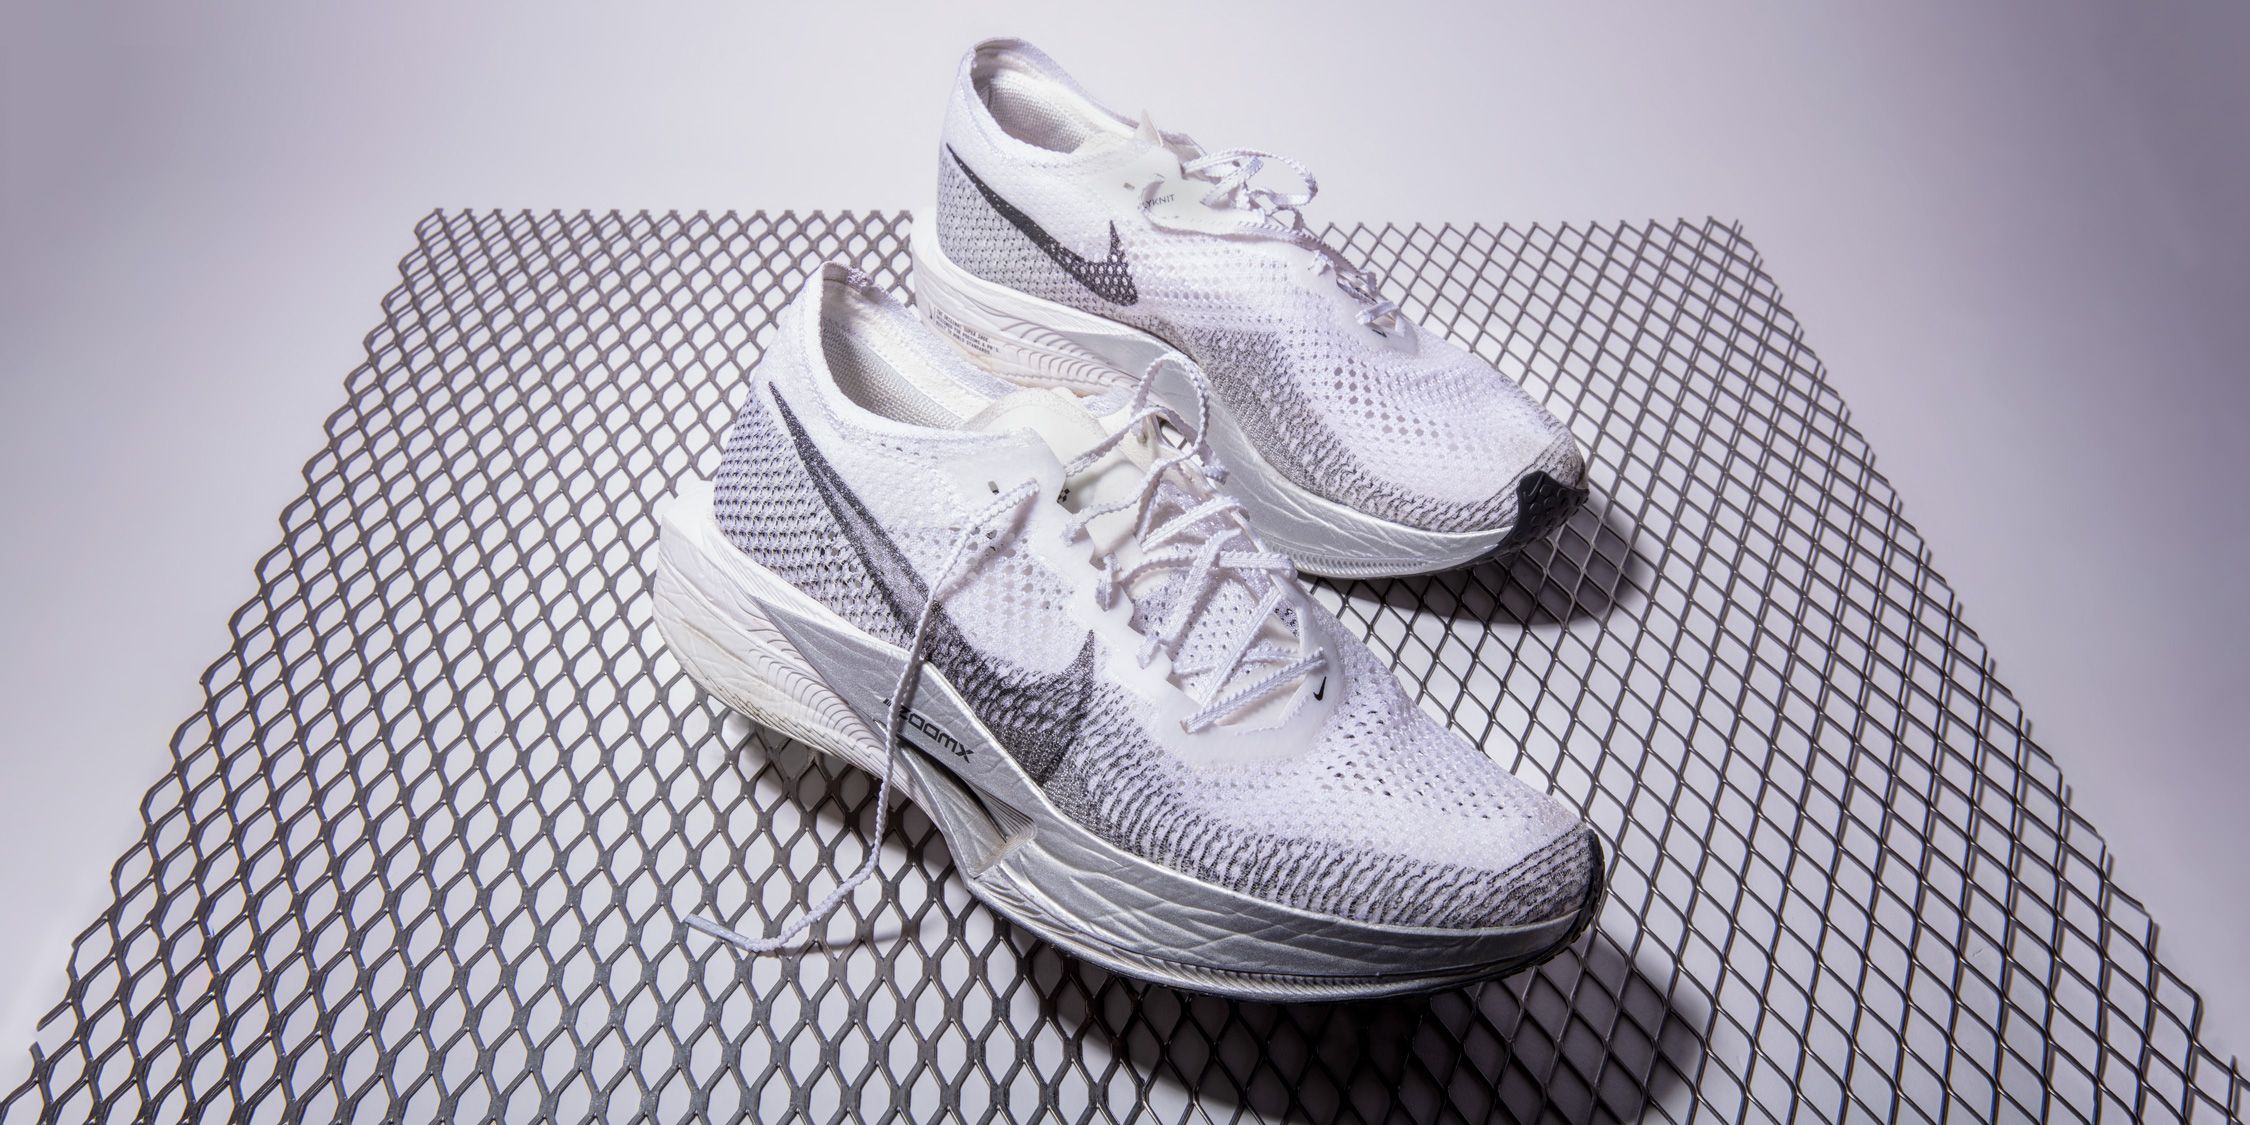 Nike Vaporfly 3 Review: We Tested the Fastest Marathon Racer